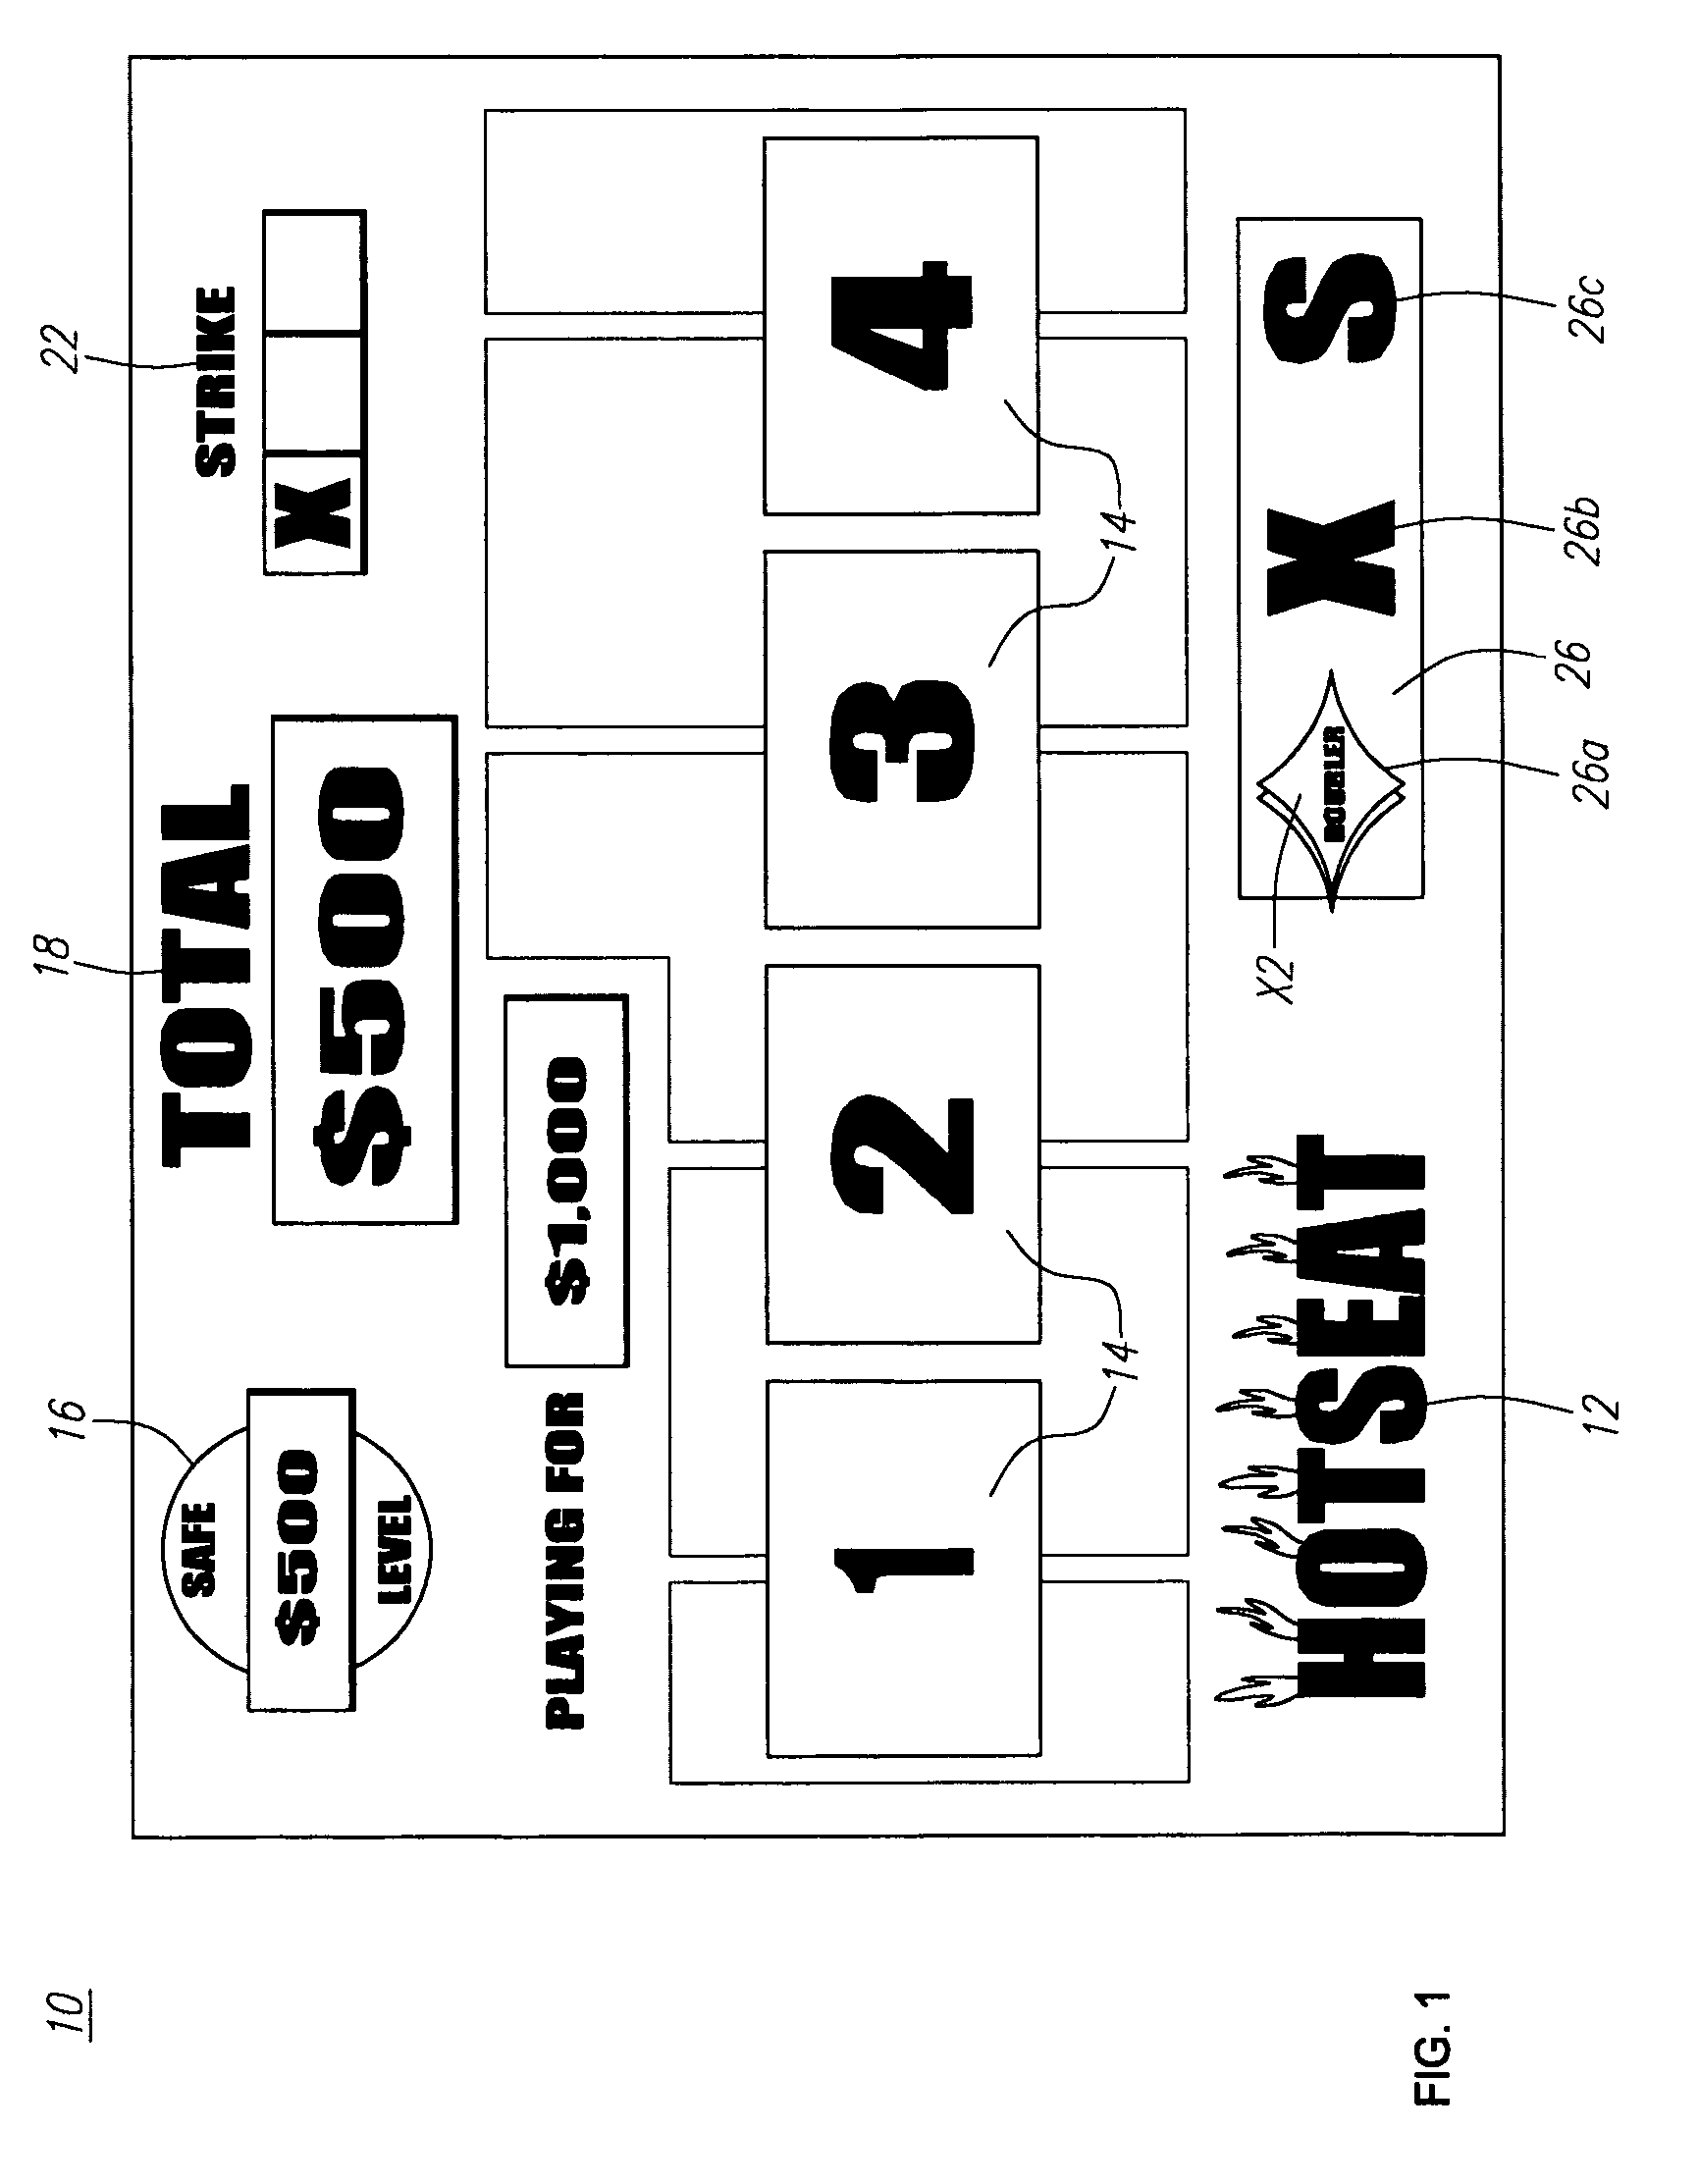 Apparatus and method for game play in an electronic environment